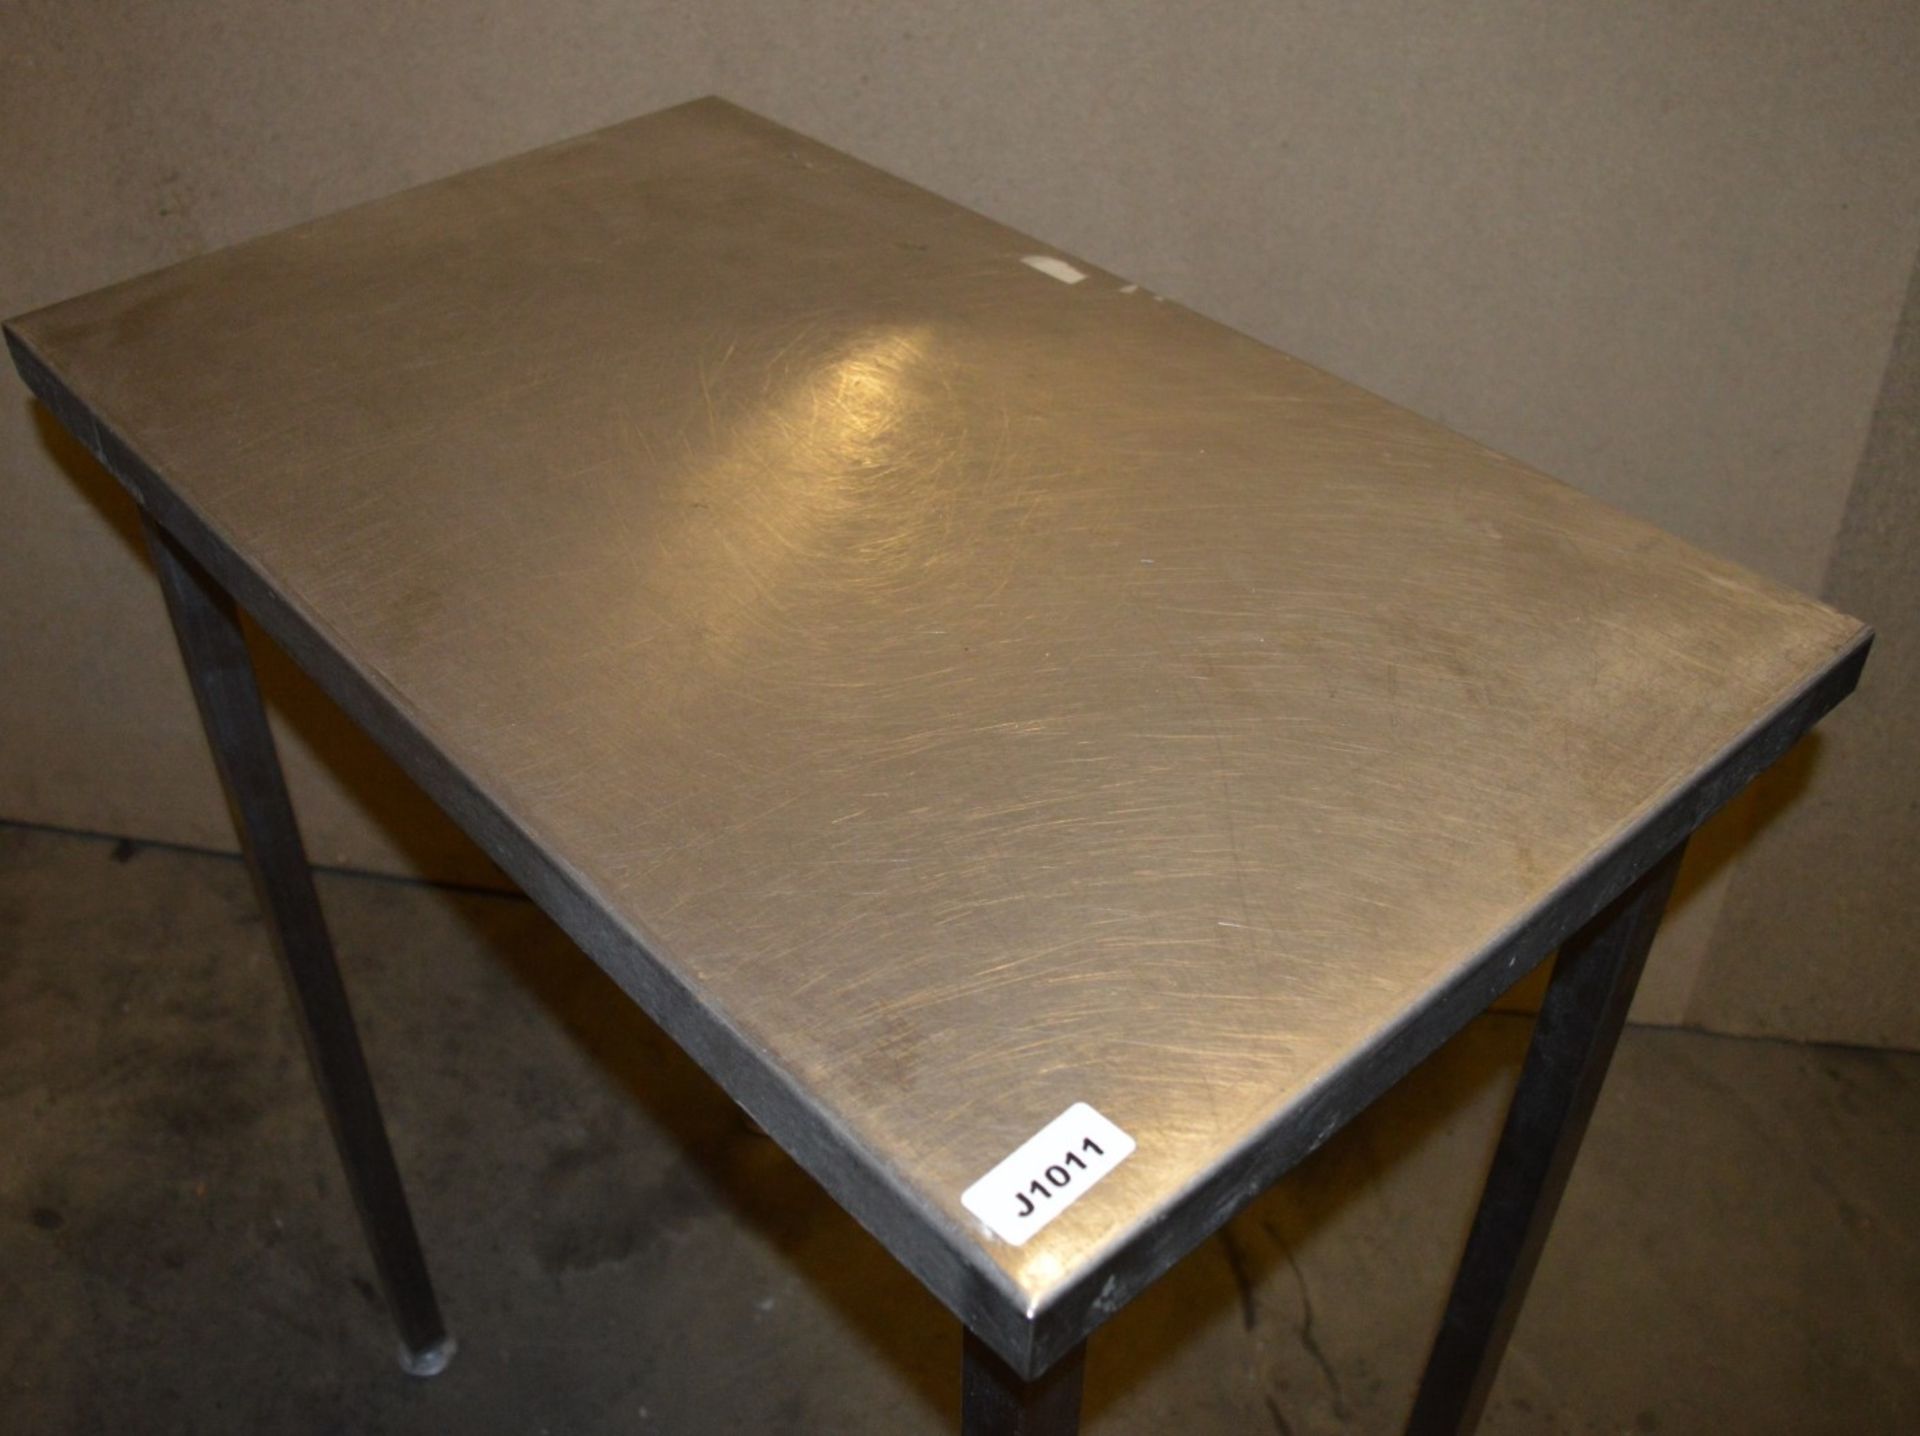 1 x Stainless Steel Prep Table - Small Size - CL282 - Ref J1011 - Location: Bolton BL1Thursday - Image 2 of 2